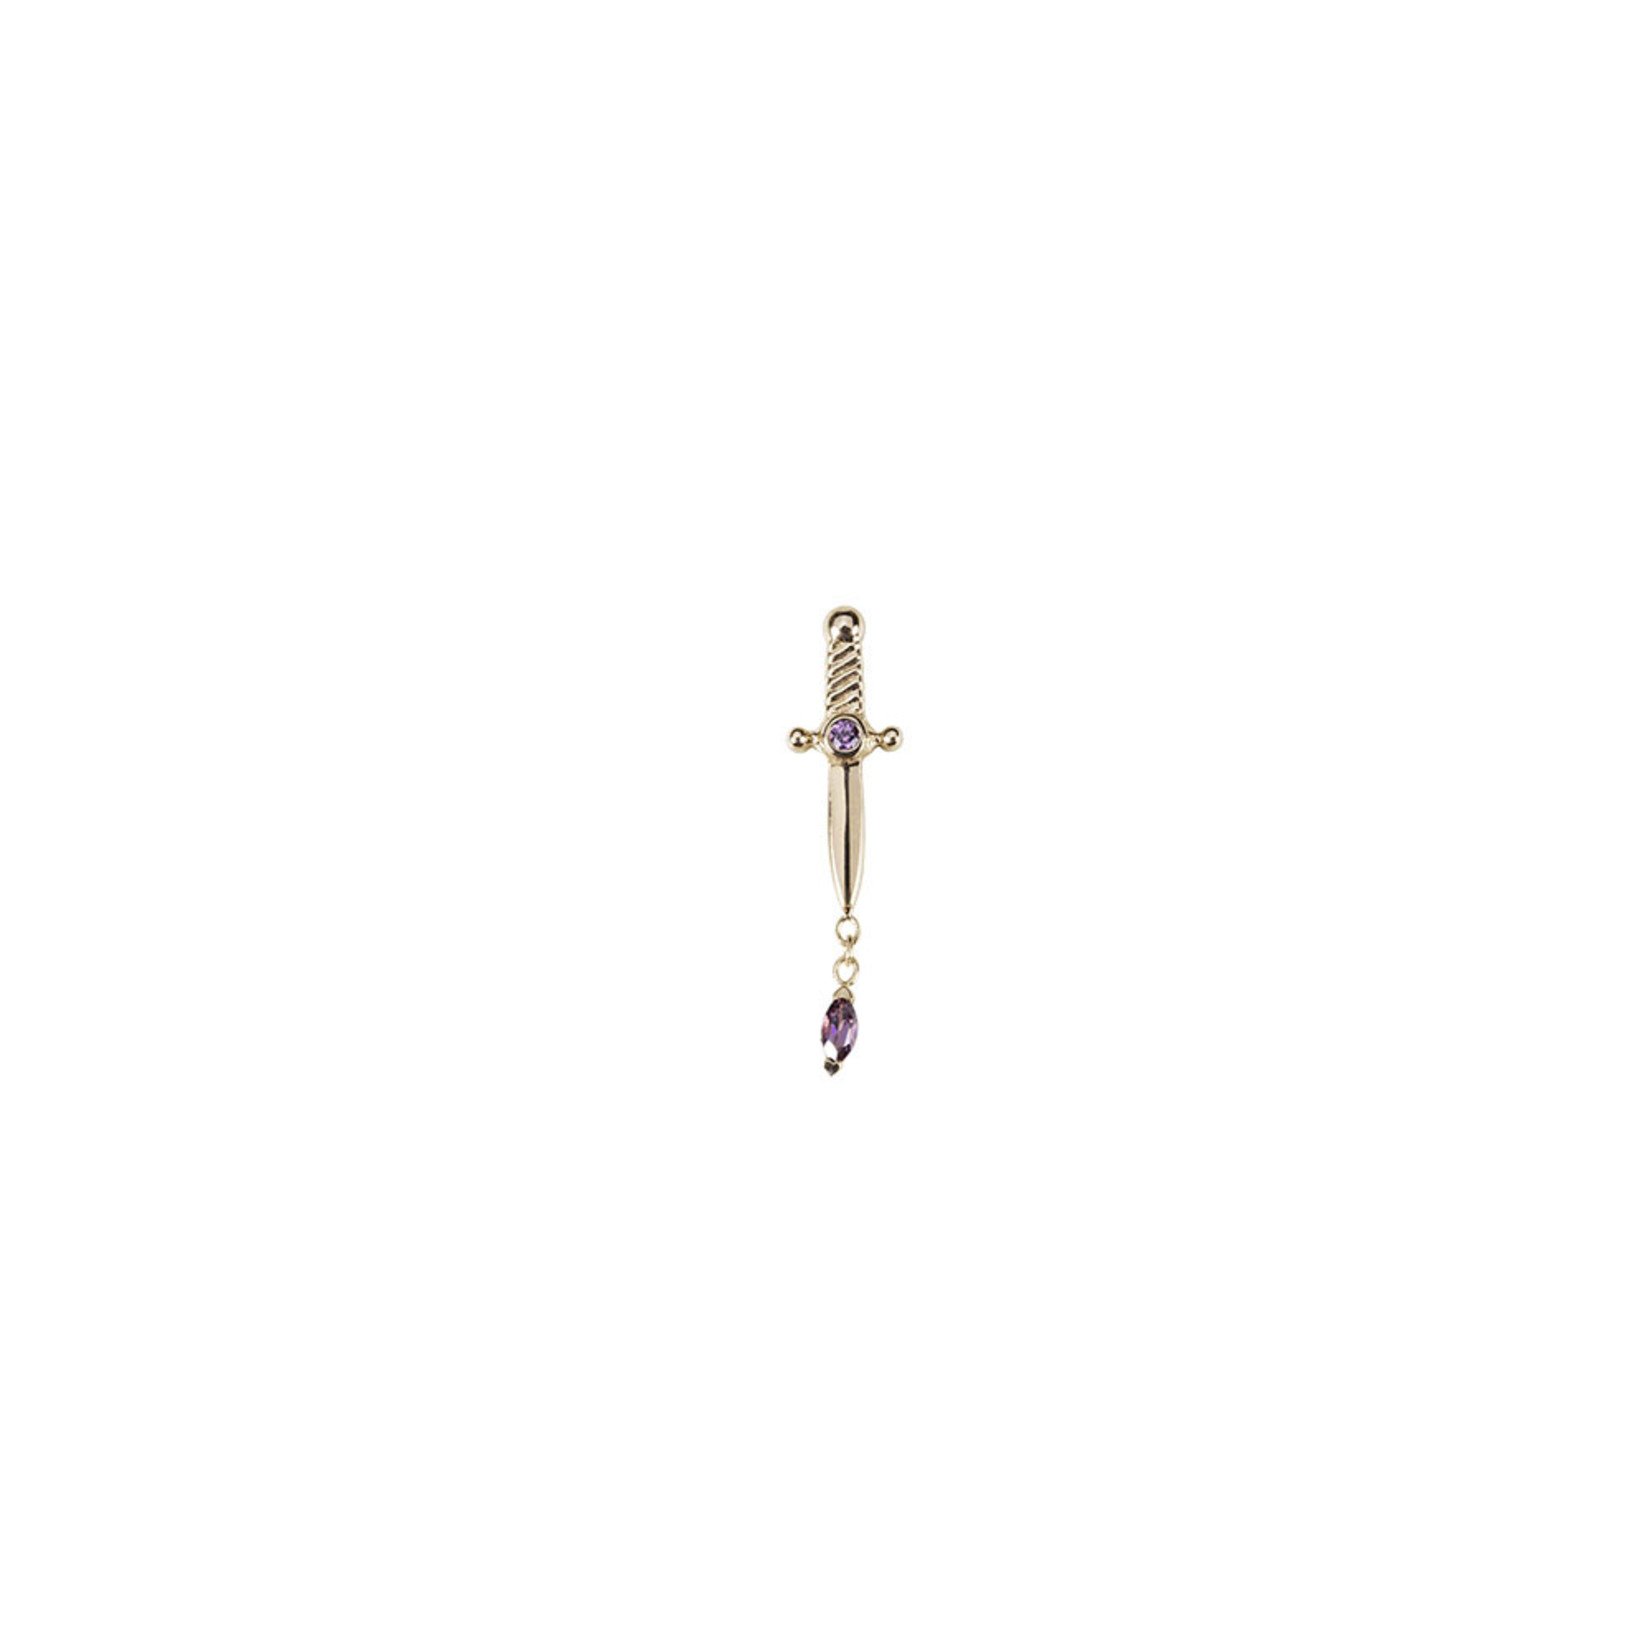 BVLA BVLA solid 18 karat rose gold "Kiss of Death" threaded end with 1.25 AA rhodolite in the hilt and 3x1.5 AA rhodolite marquise.